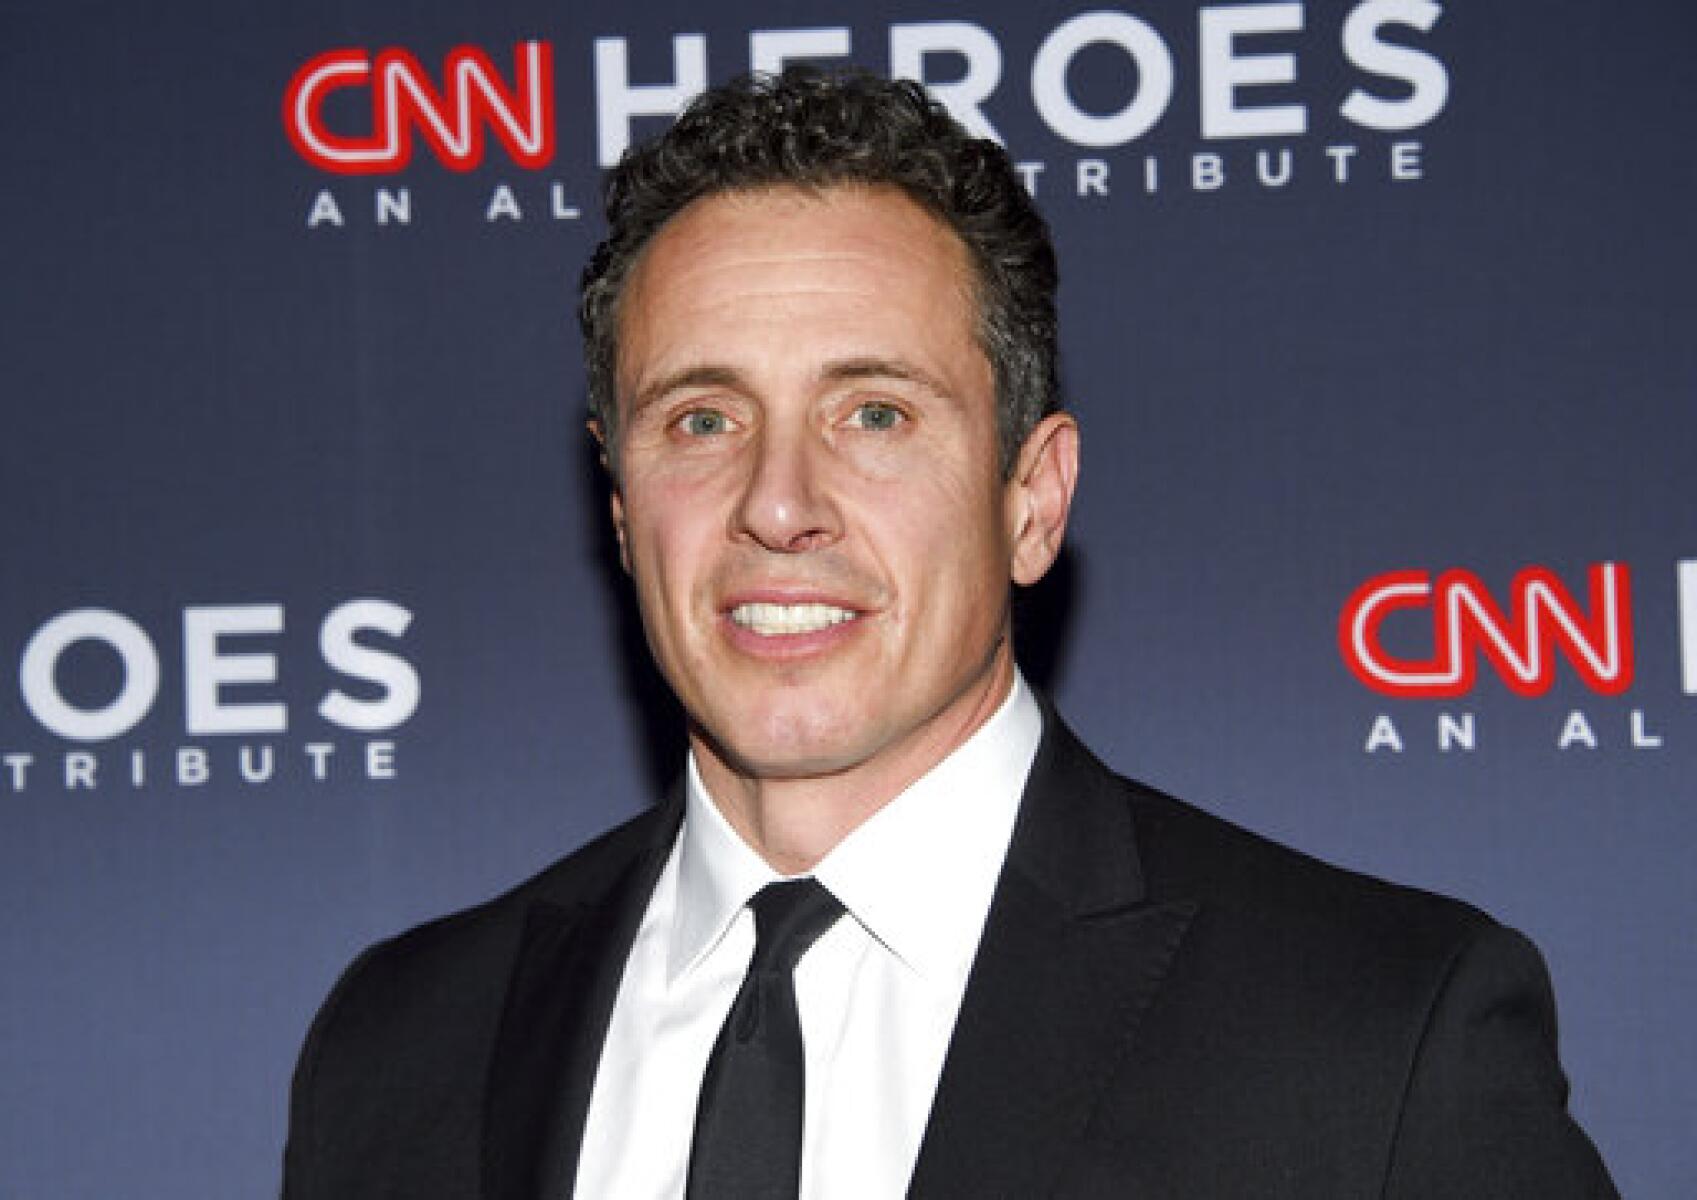 FILE - In this Dec. 8, 2018 file photo, CNN anchor Chris Cuomo attends the 12th annual CNN Heroes: An All-Star Tribute at the American Museum of Natural History in New York. CNN says it completely supports Cuomo after he was seen on video threatening to push a man down some stairs during a confrontation after the man apparently called him “Fredo,” in a seeming reference to the “Godfather” movies. The video appeared Monday, Aug. 12, 2019 on a conservative YouTube channel. (Photo by Evan Agostini/Invision/AP, File)